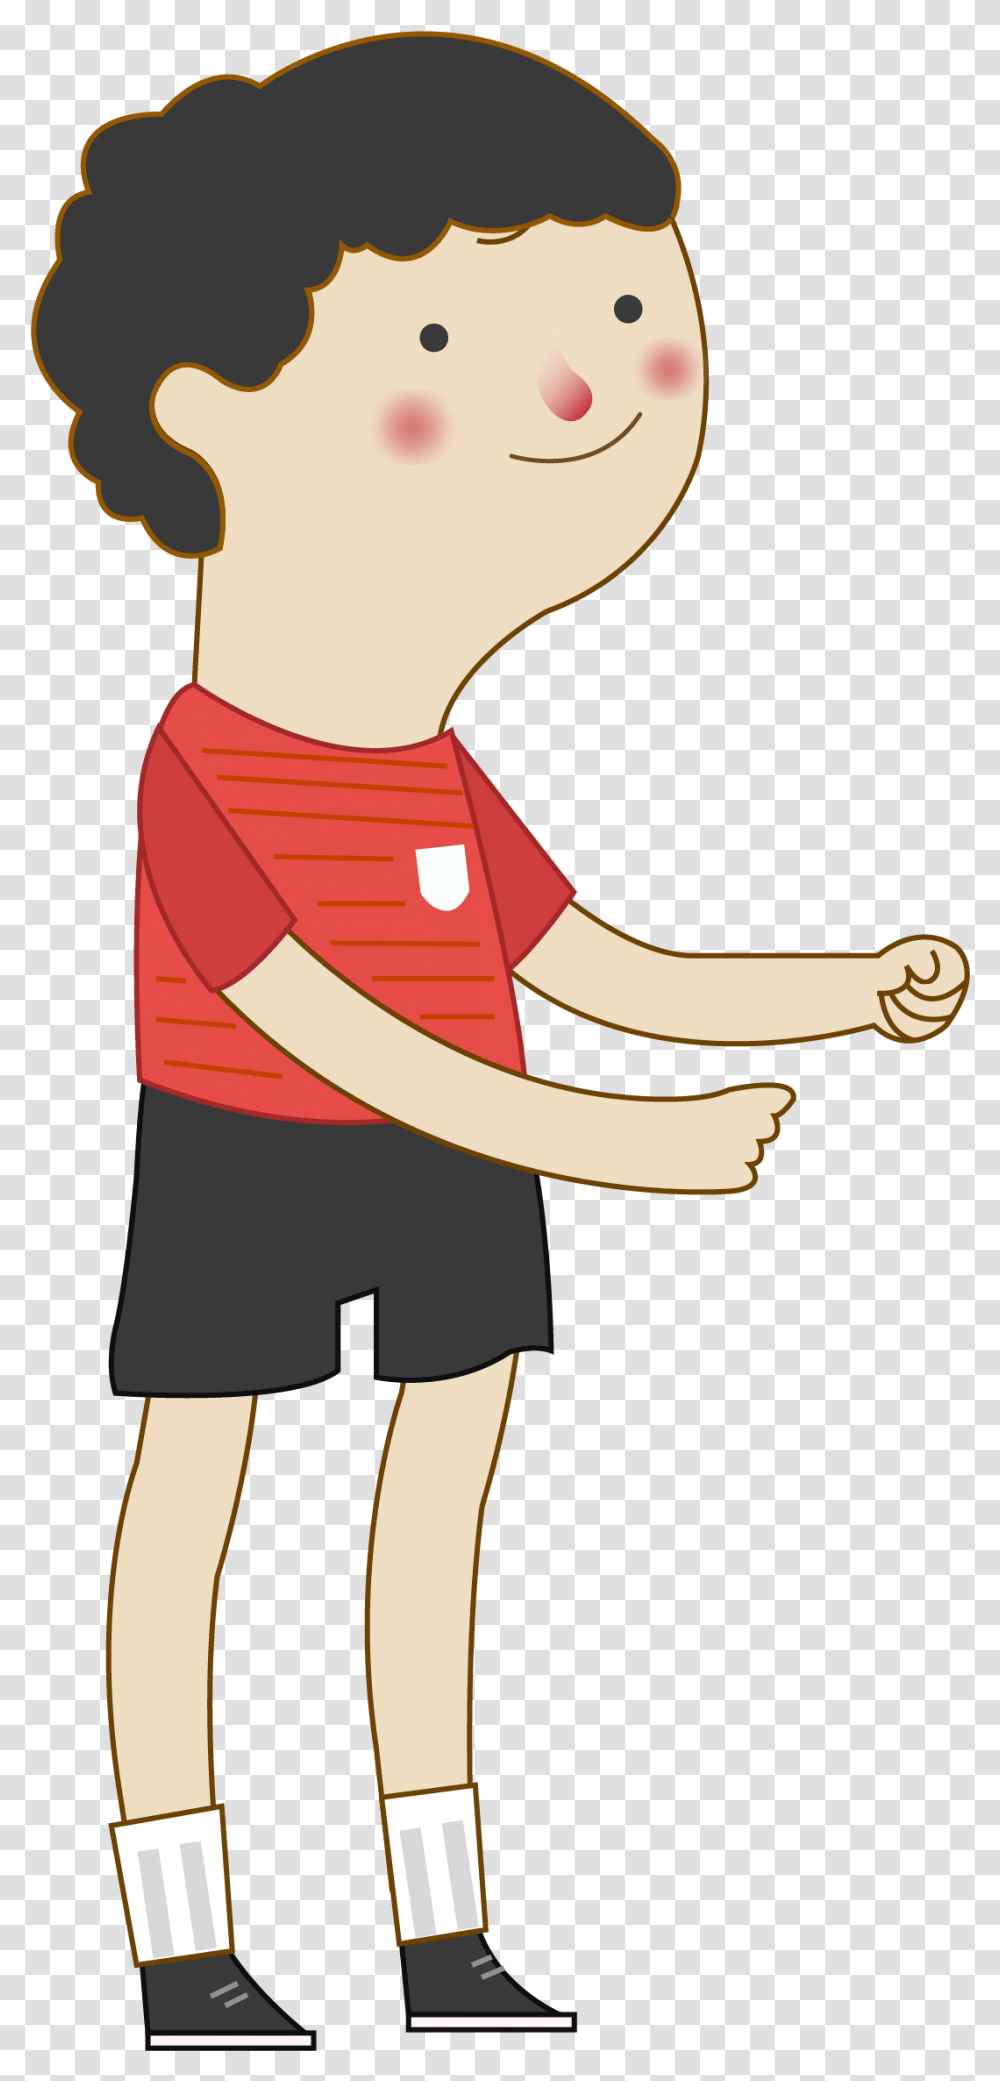 Angry Guy Cartoon, Arm, Hand, Weapon, Weaponry Transparent Png